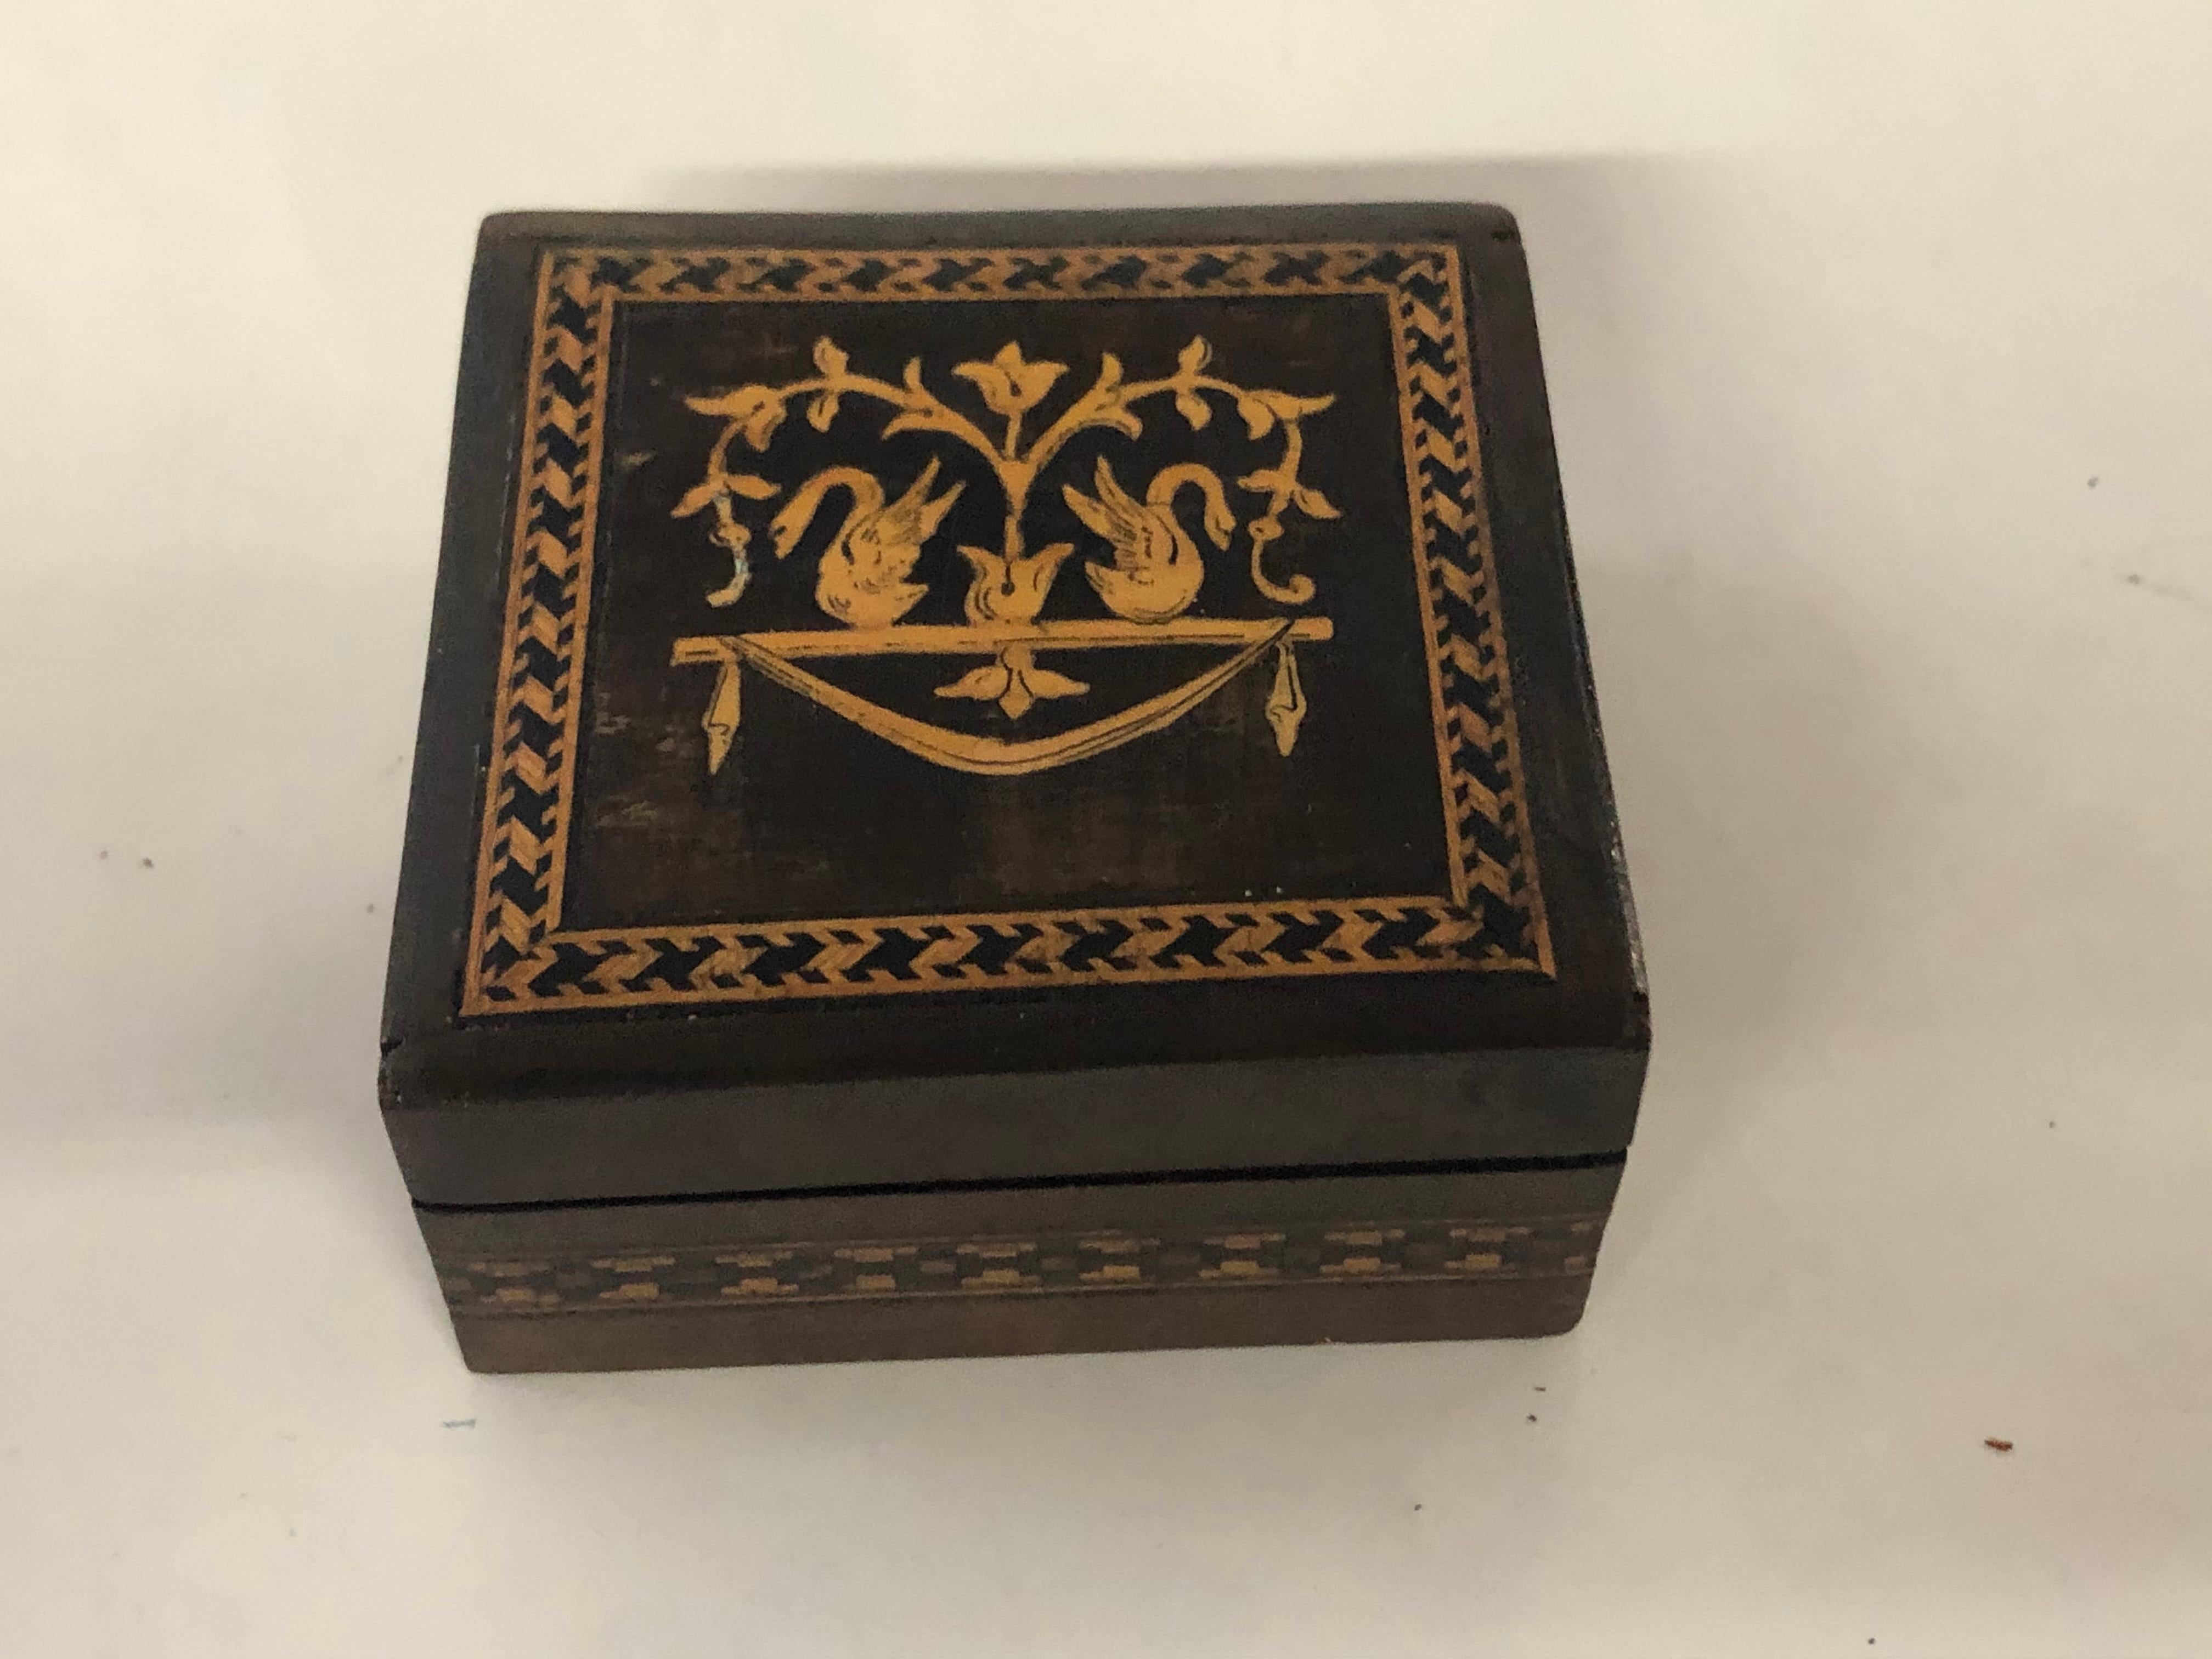 Antique square marquetry inlaid walnut trinket box or snuff box with fabulous satinwood swans flanking a bellflower decoration.
A/F - A small quarter inch portion of inlay on the left swan and a slight shrinkage, age-related crack on bottom noted